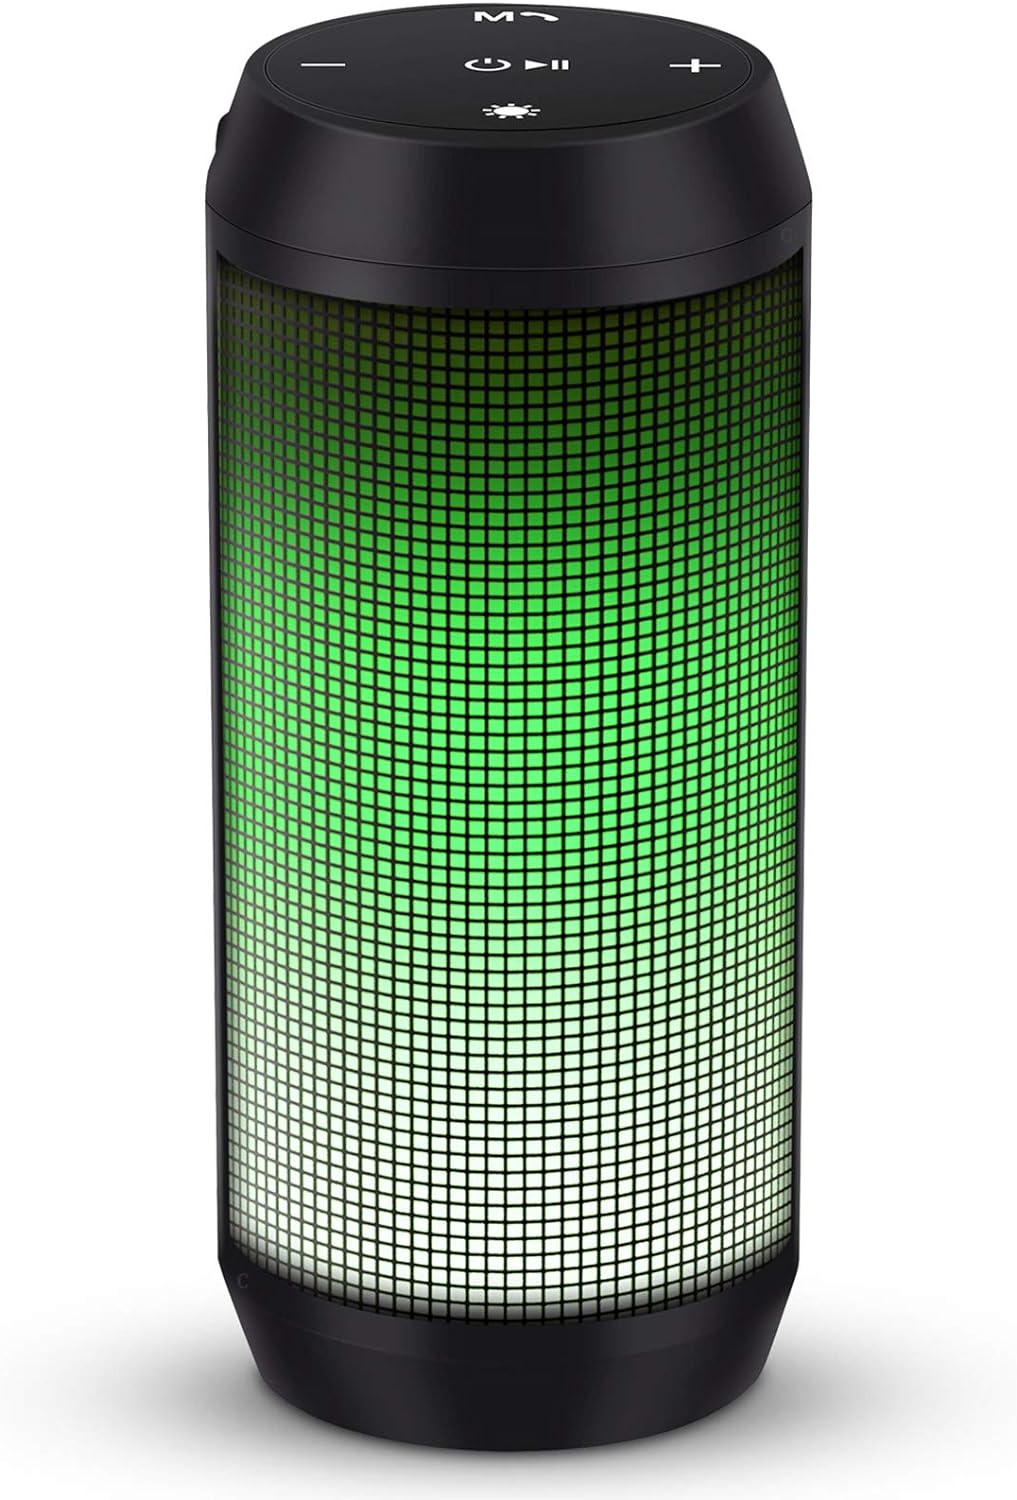 Bluetooth Speaker Portable Wireless with Lights, Stereo Loud Volume